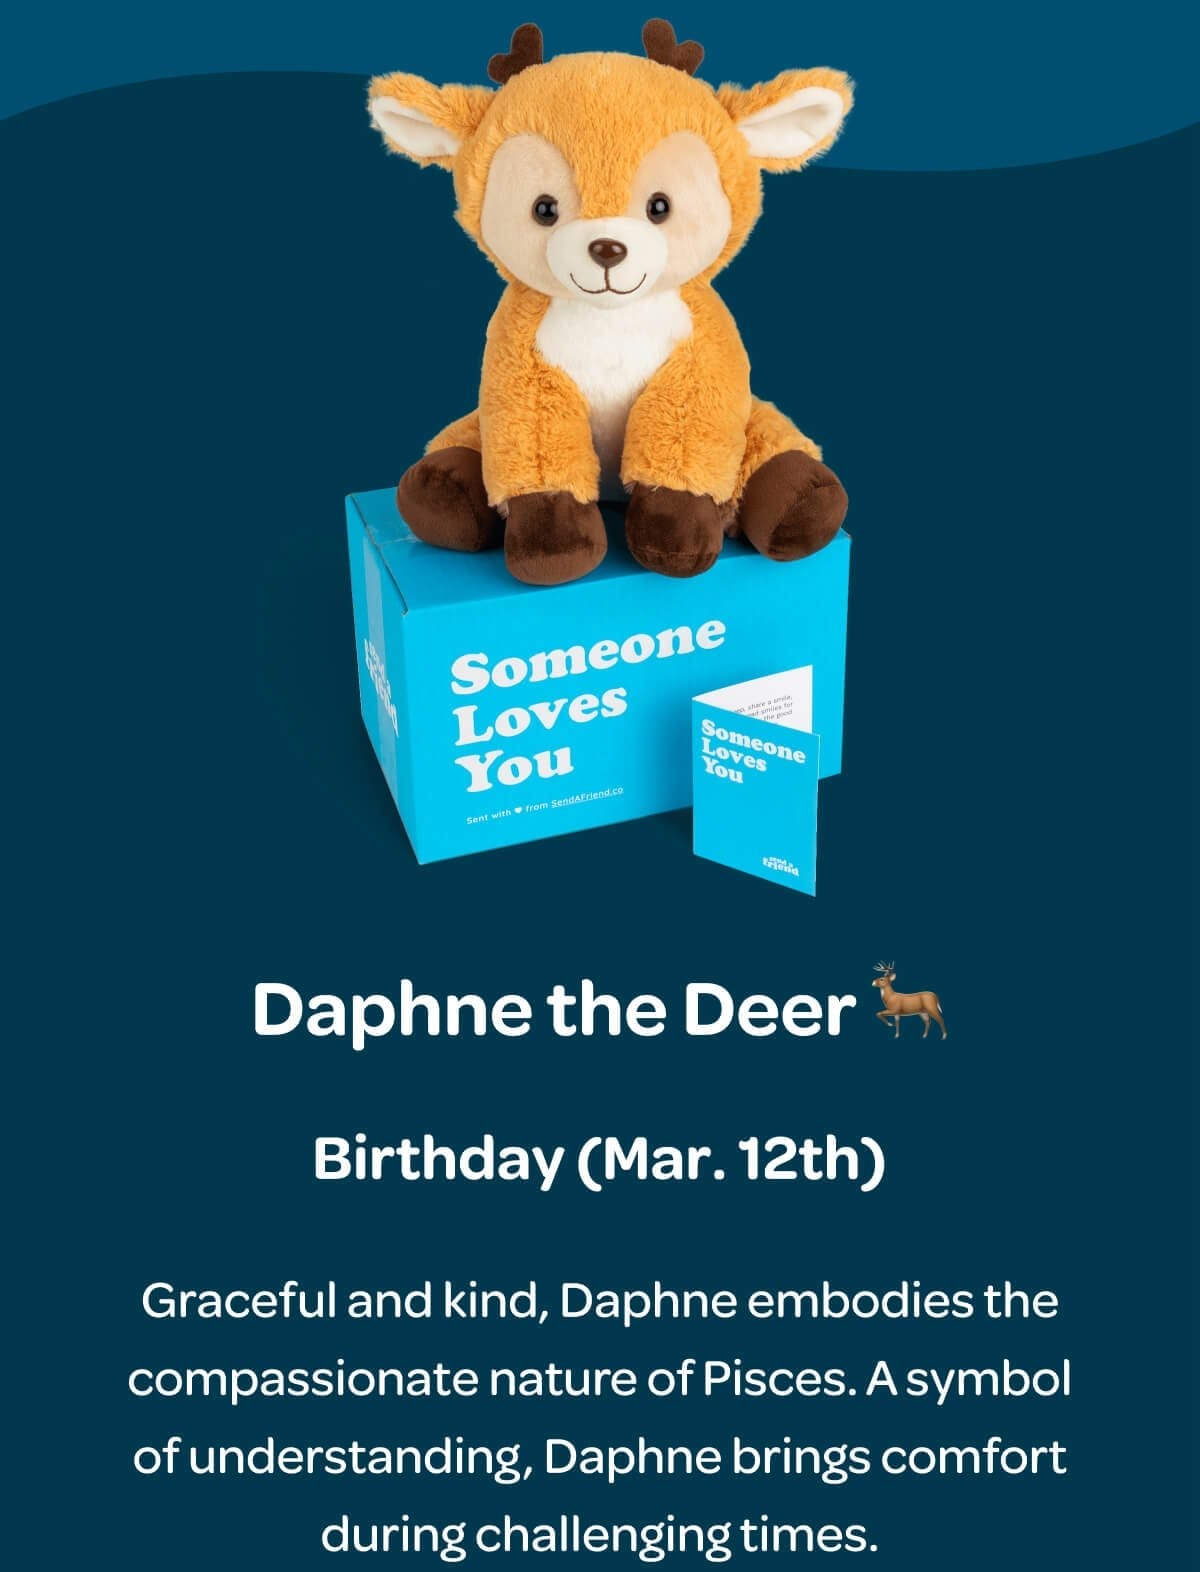 Daphne the Deer 🦌 Birthday (Mar. 12th) Graceful and kind, Daphne embodies the compassionate nature of Pisces. A symbol of understanding, Daphne brings comfort during challenging times.